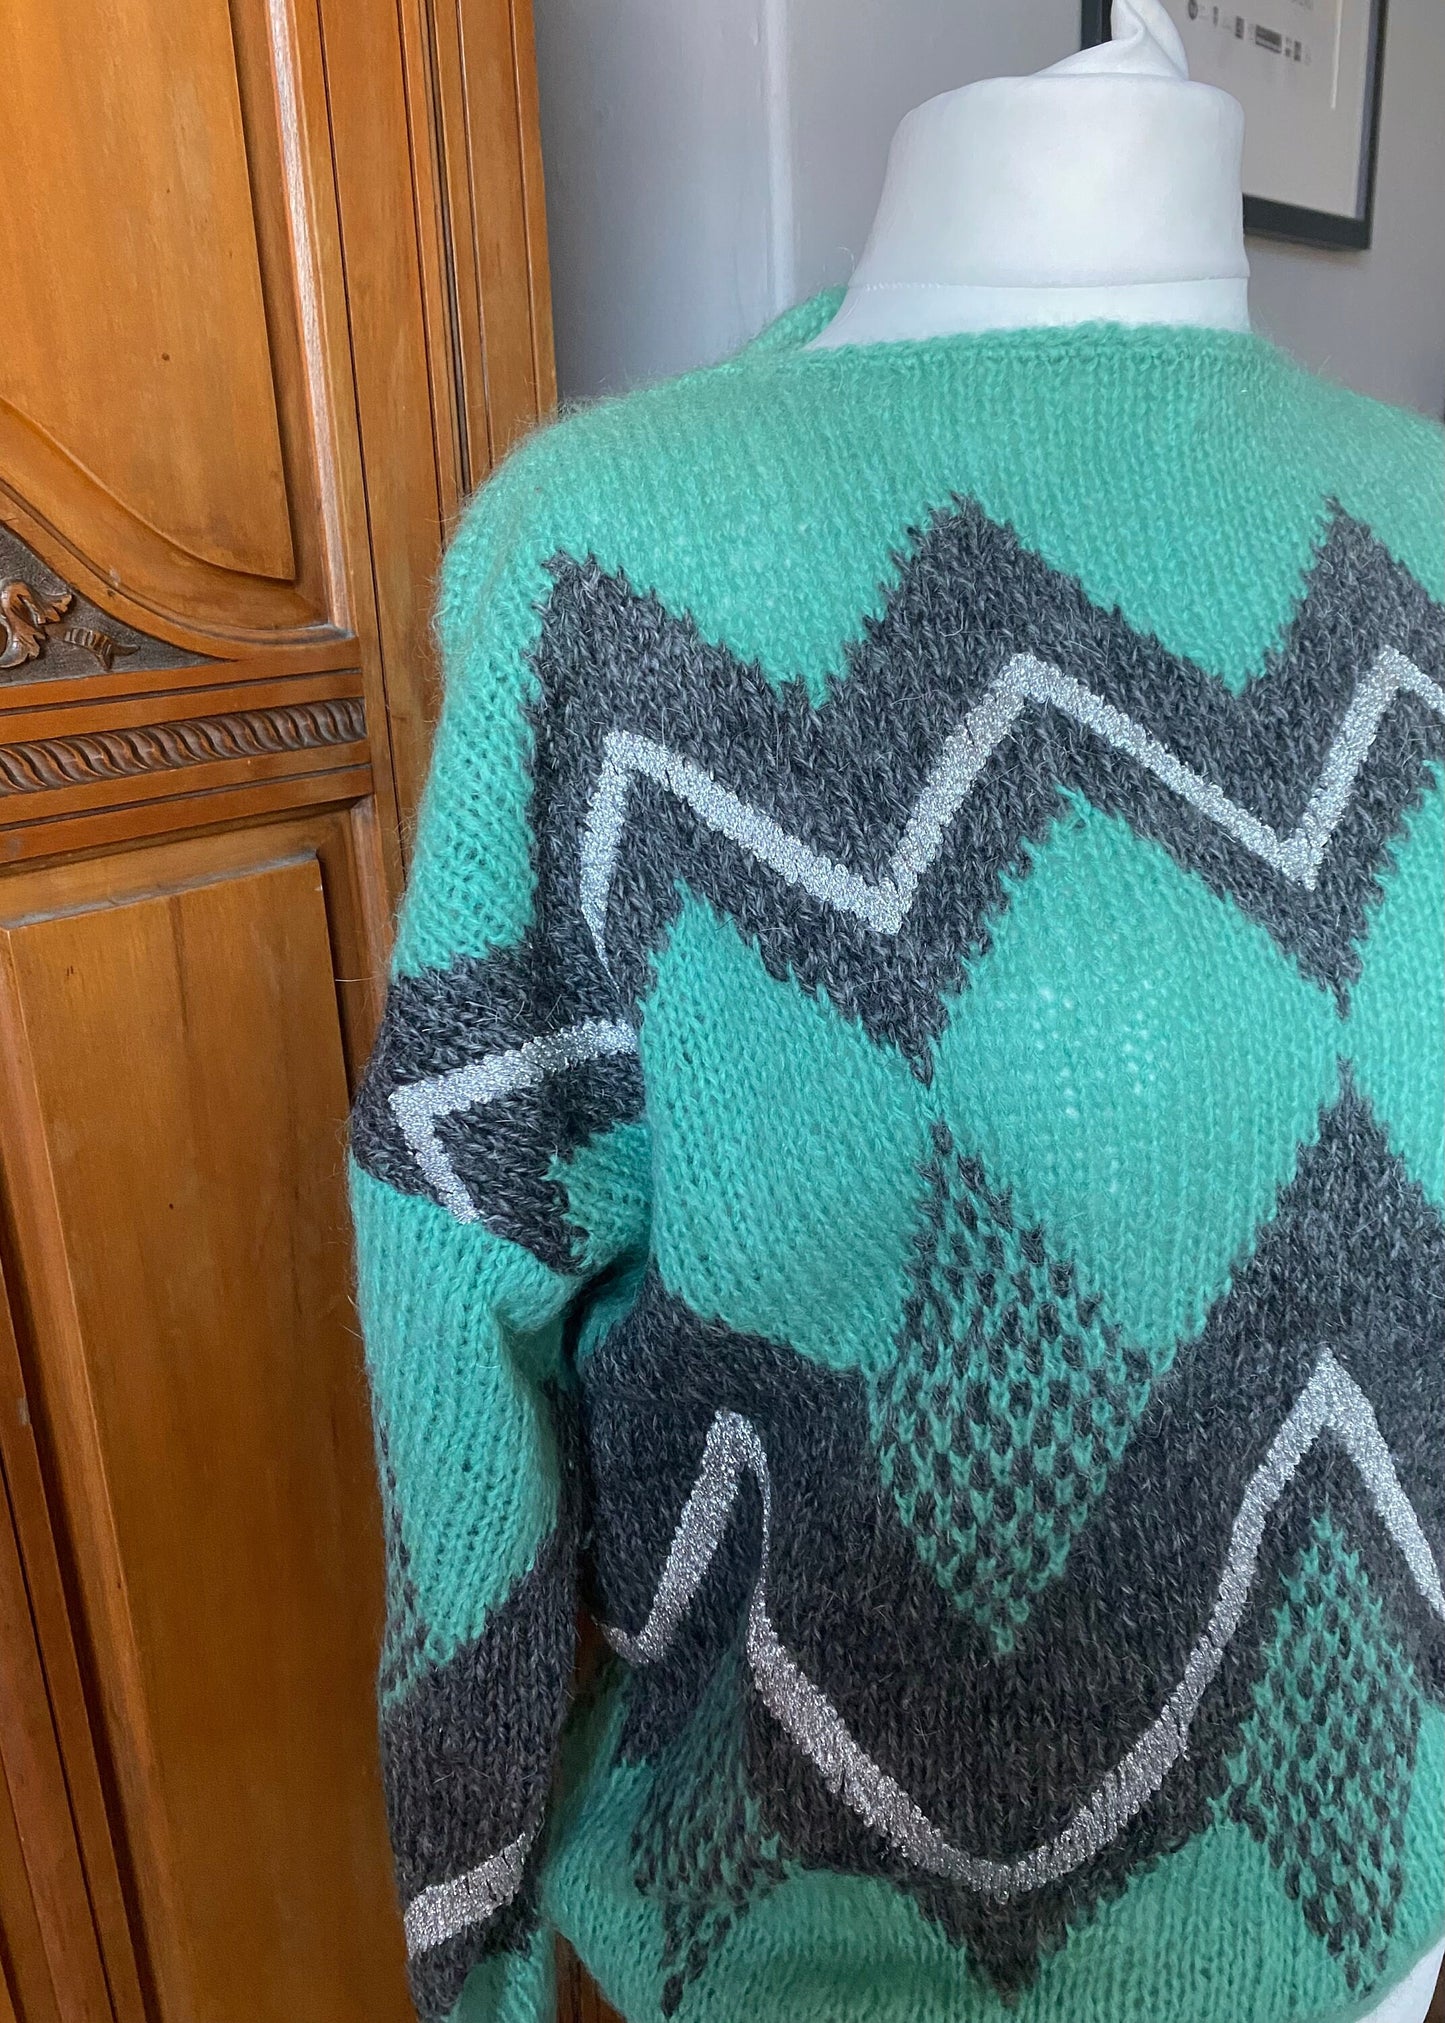 80s green, grey and silver geometric patterned mohair blend jumper . Approx UK size 14-20